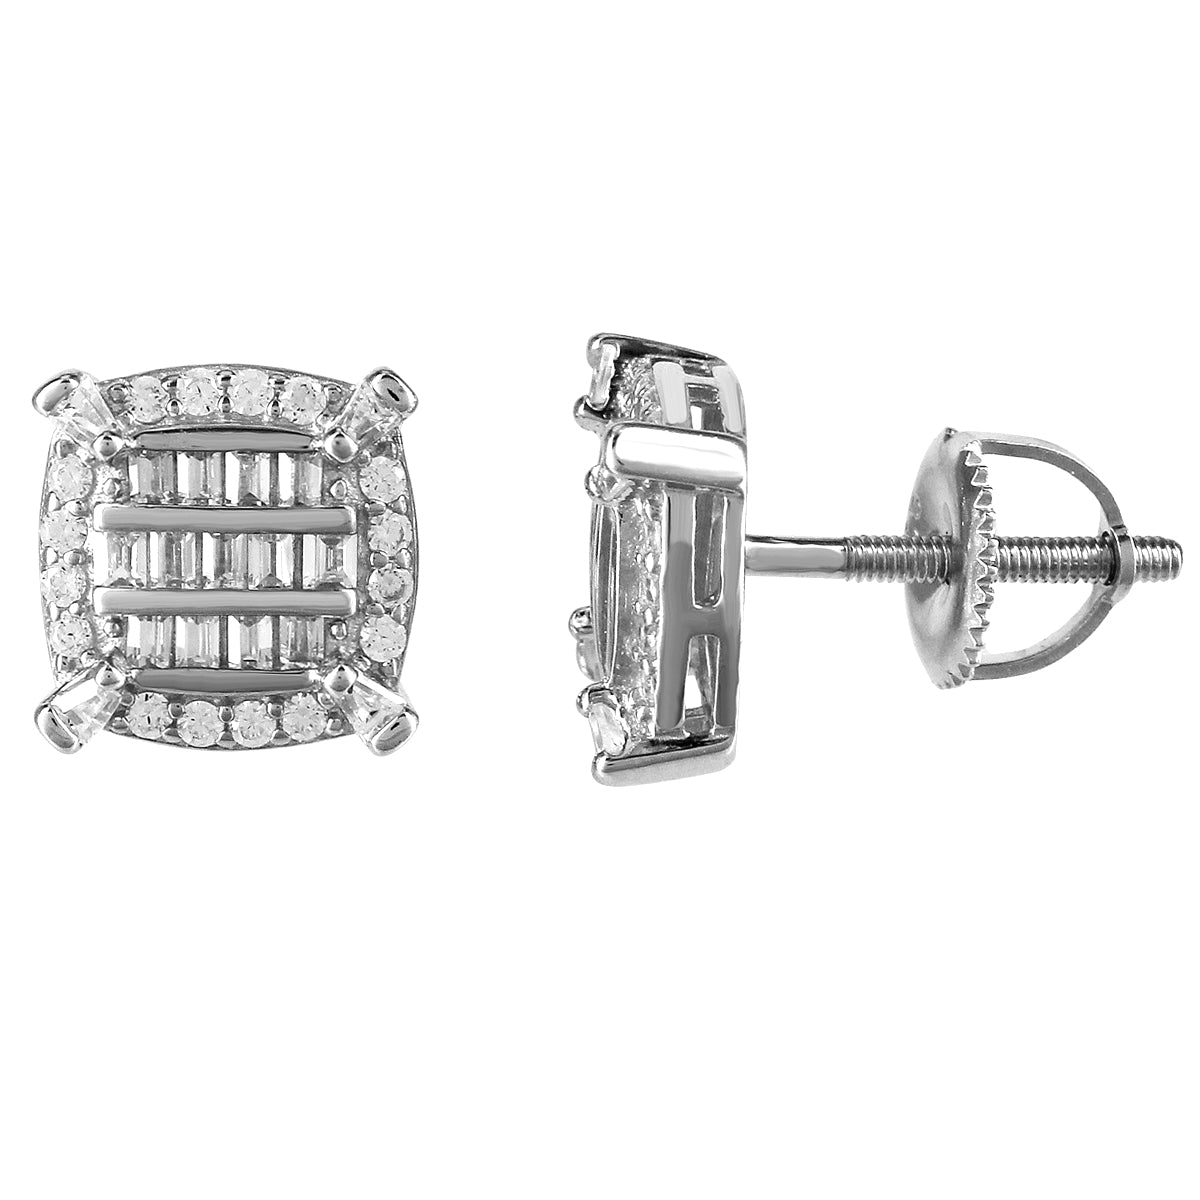 Sterling Silver Icy Baguette Square Prong Hip Hop Stud Earrings